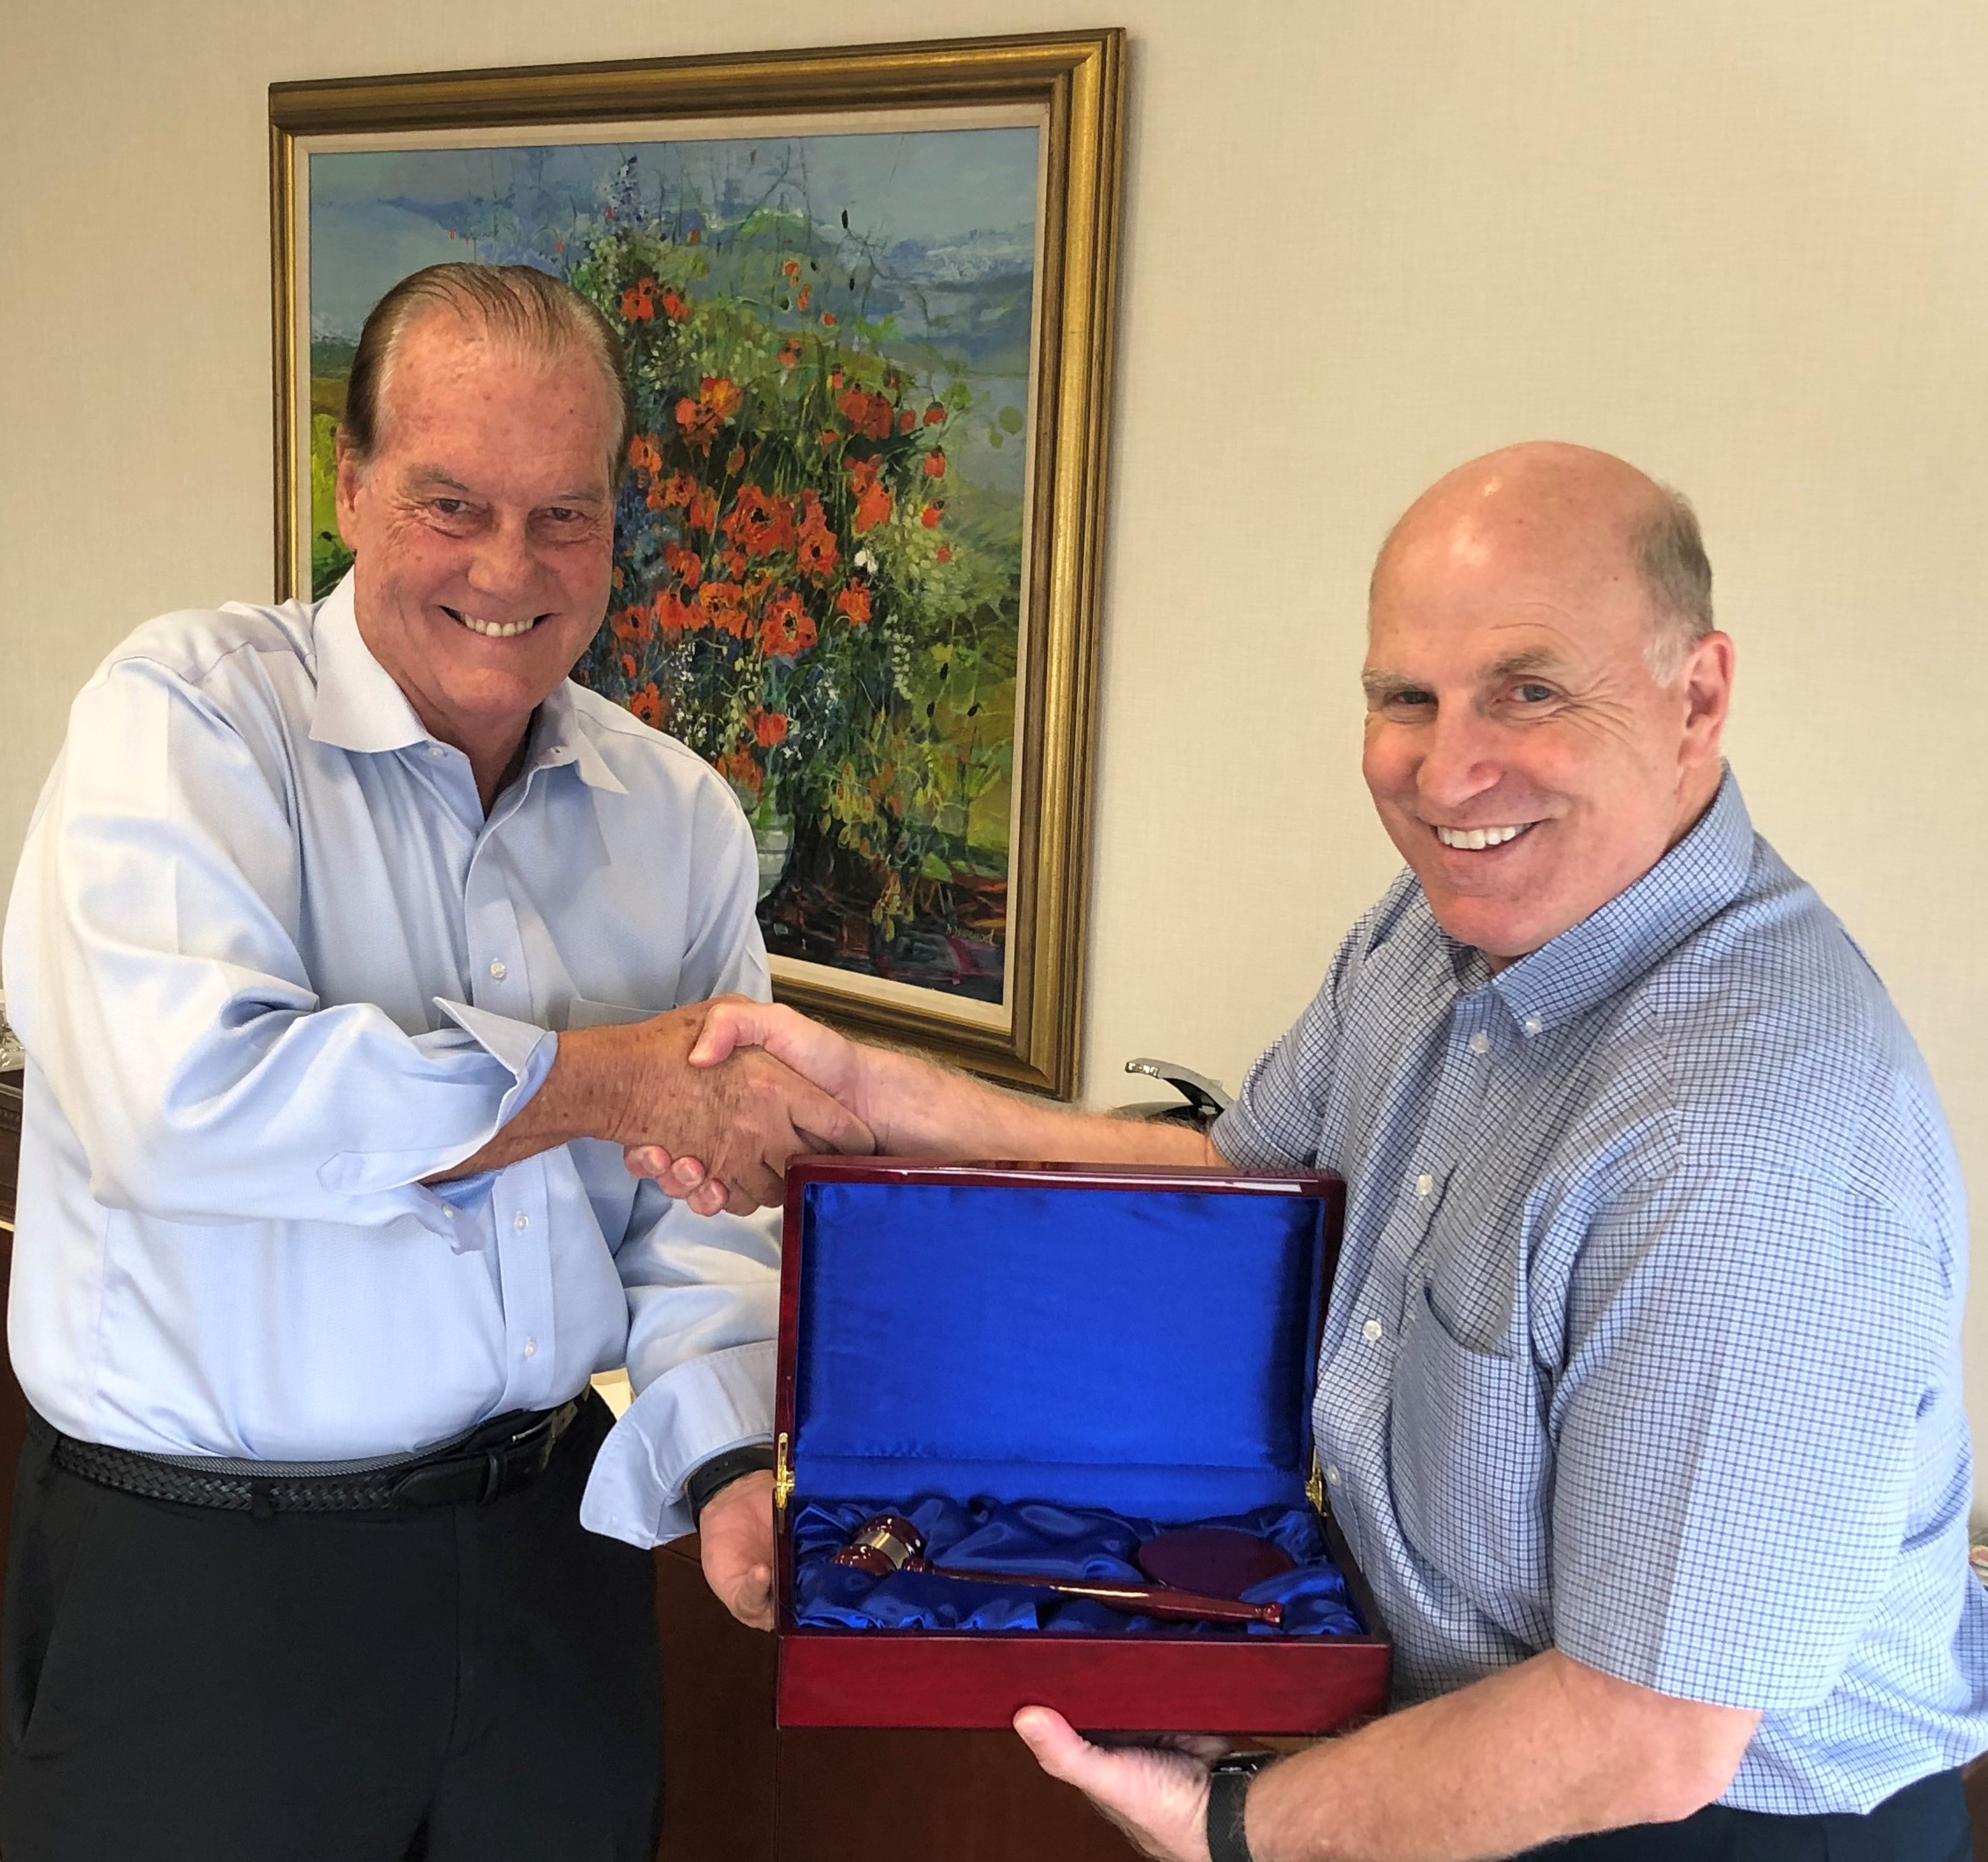 Mike Martella (rt), the Van Wezel Foundation’s immediate past board chair and current Vice-Chairman, passes the gavel to newly elected chair, Jim Travers.